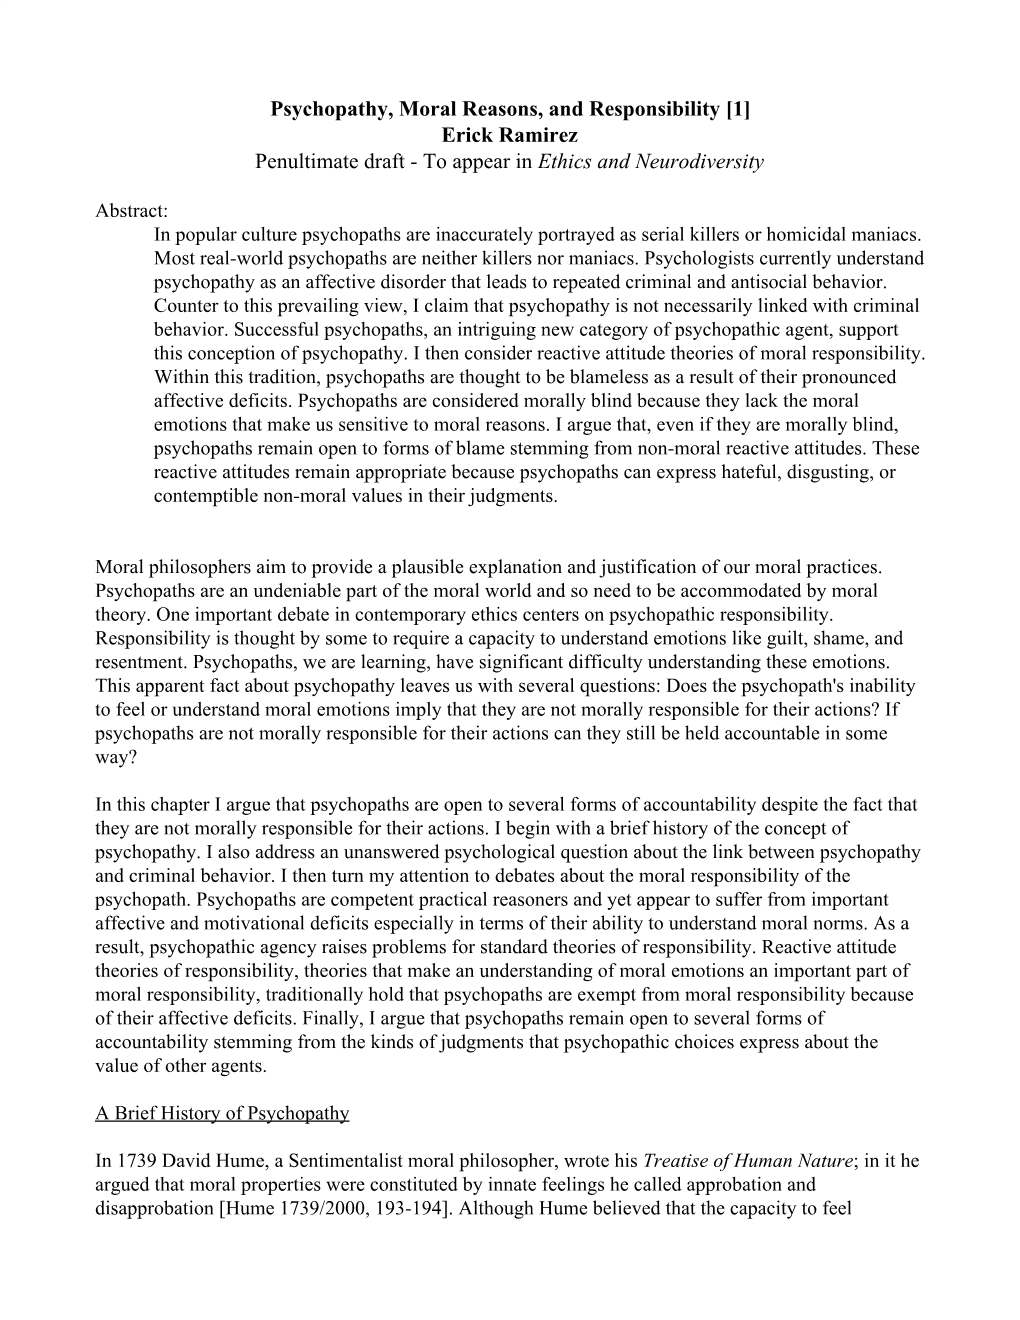 Psychopathy, Moral Reasons, and Responsibility [1] Erick Ramirez Penultimate Draft - to Appear in Ethics and Neurodiversity ​